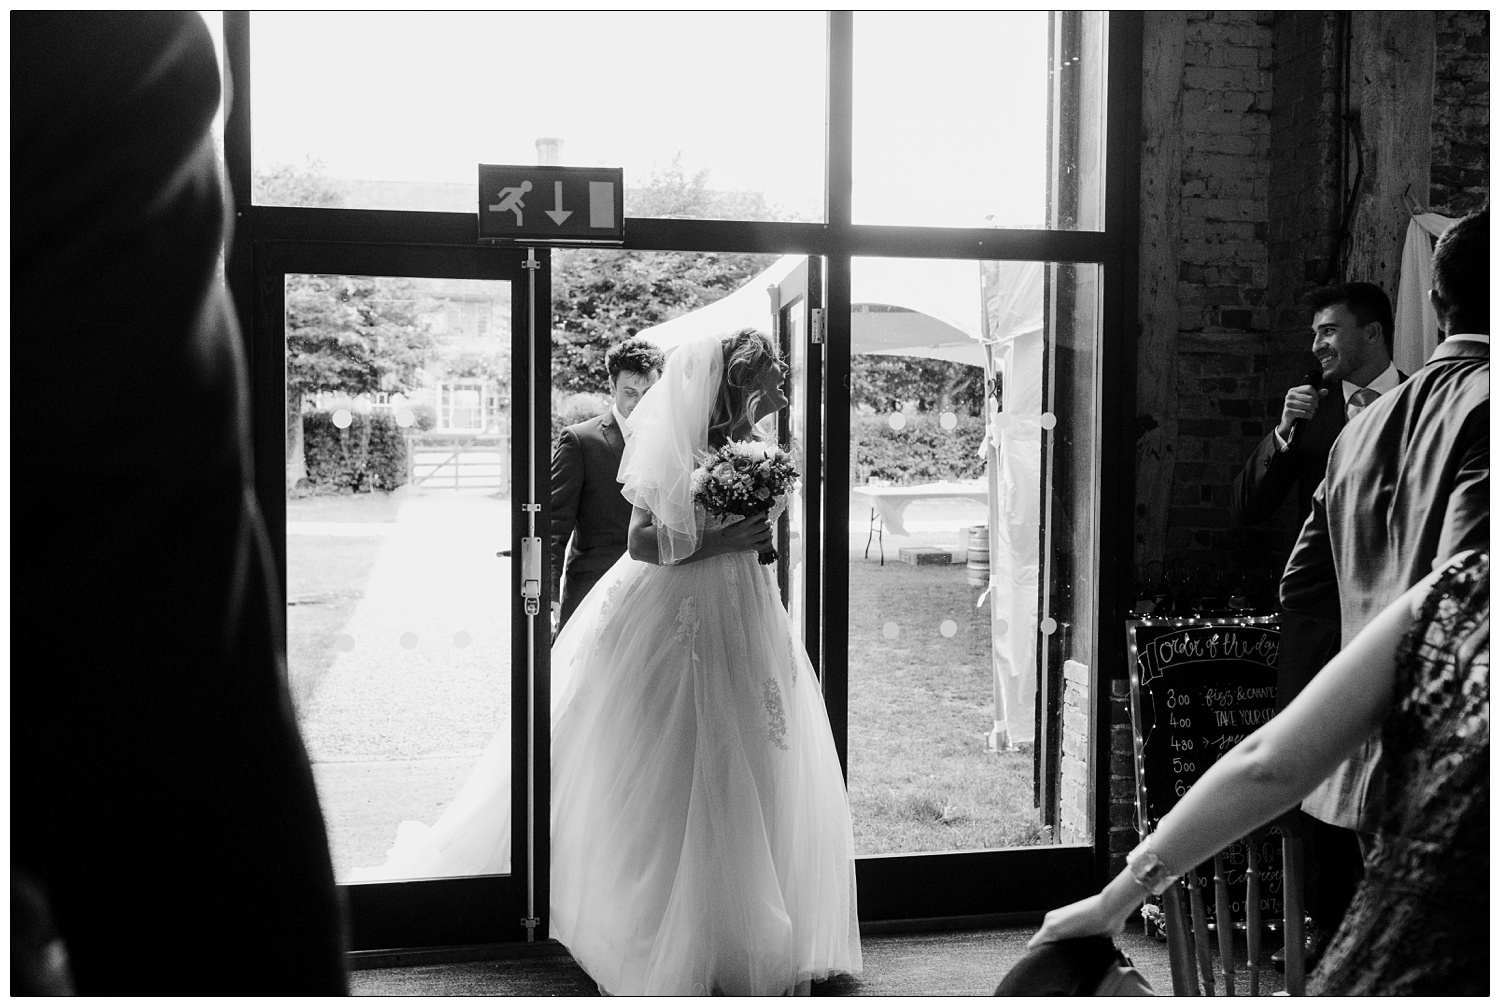 Bride and groom entering the barn